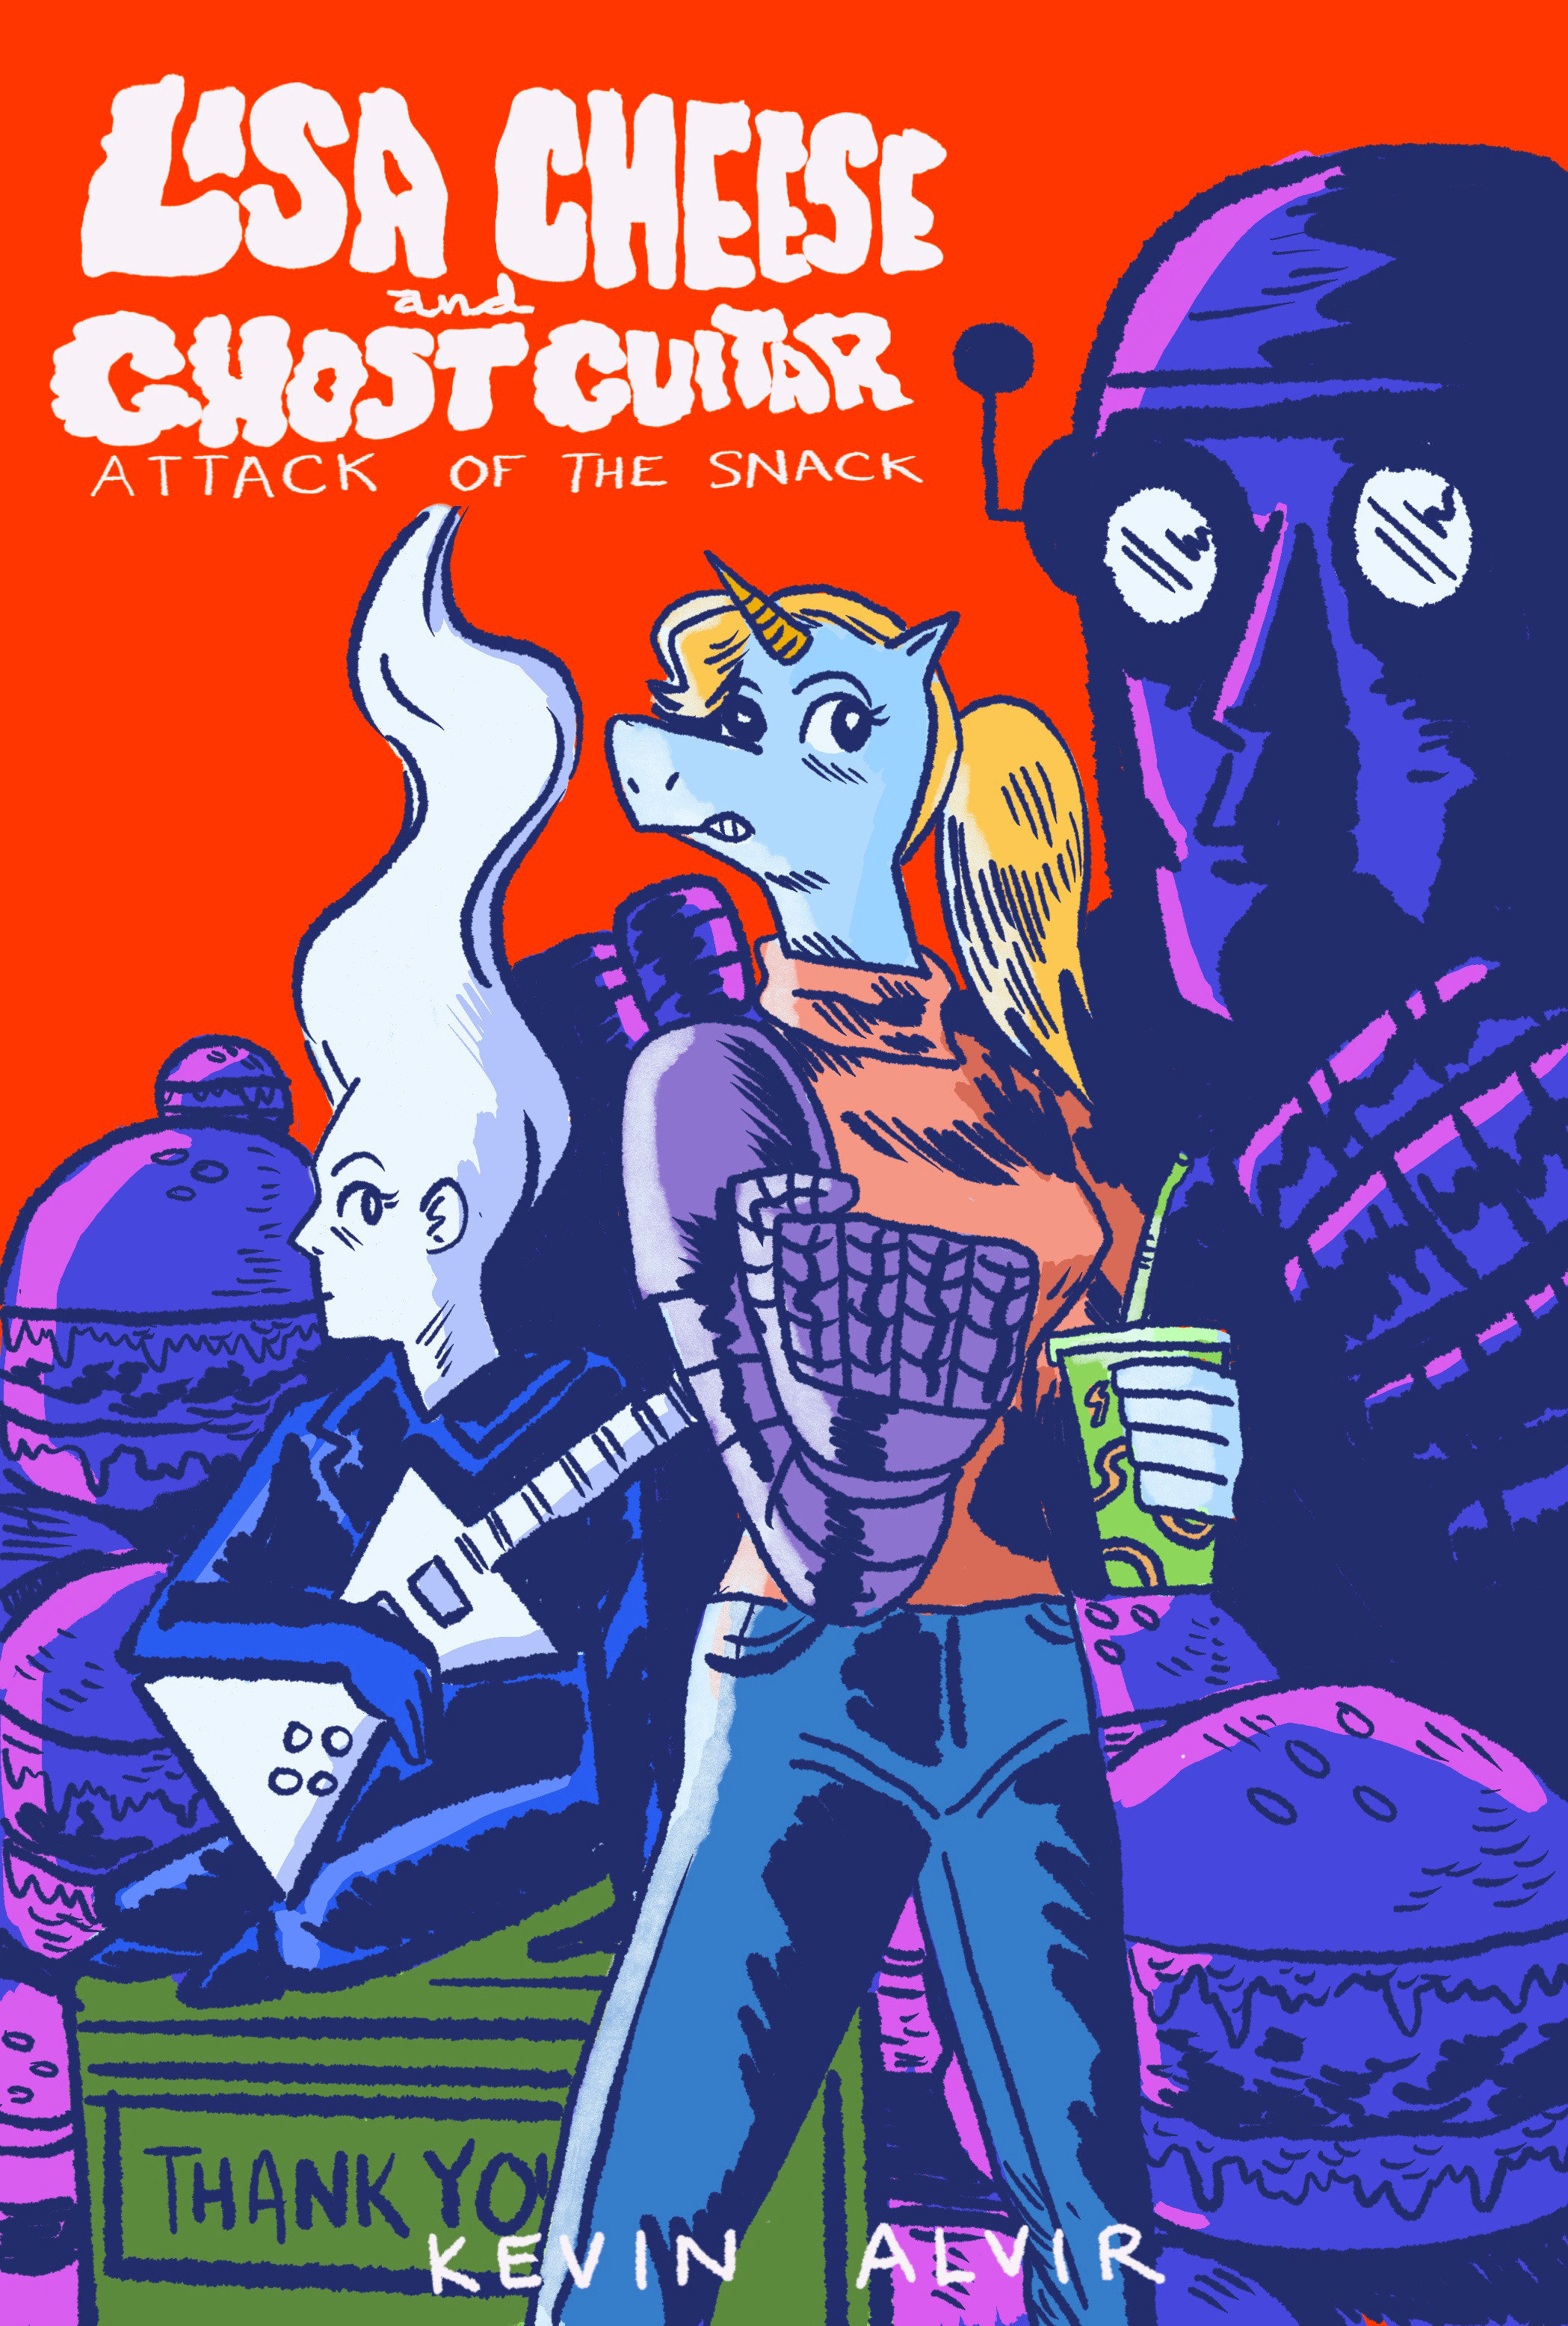 Lisa Cheese and Ghost Guitar Graphic Novel Volume 1 Attack of the Snack